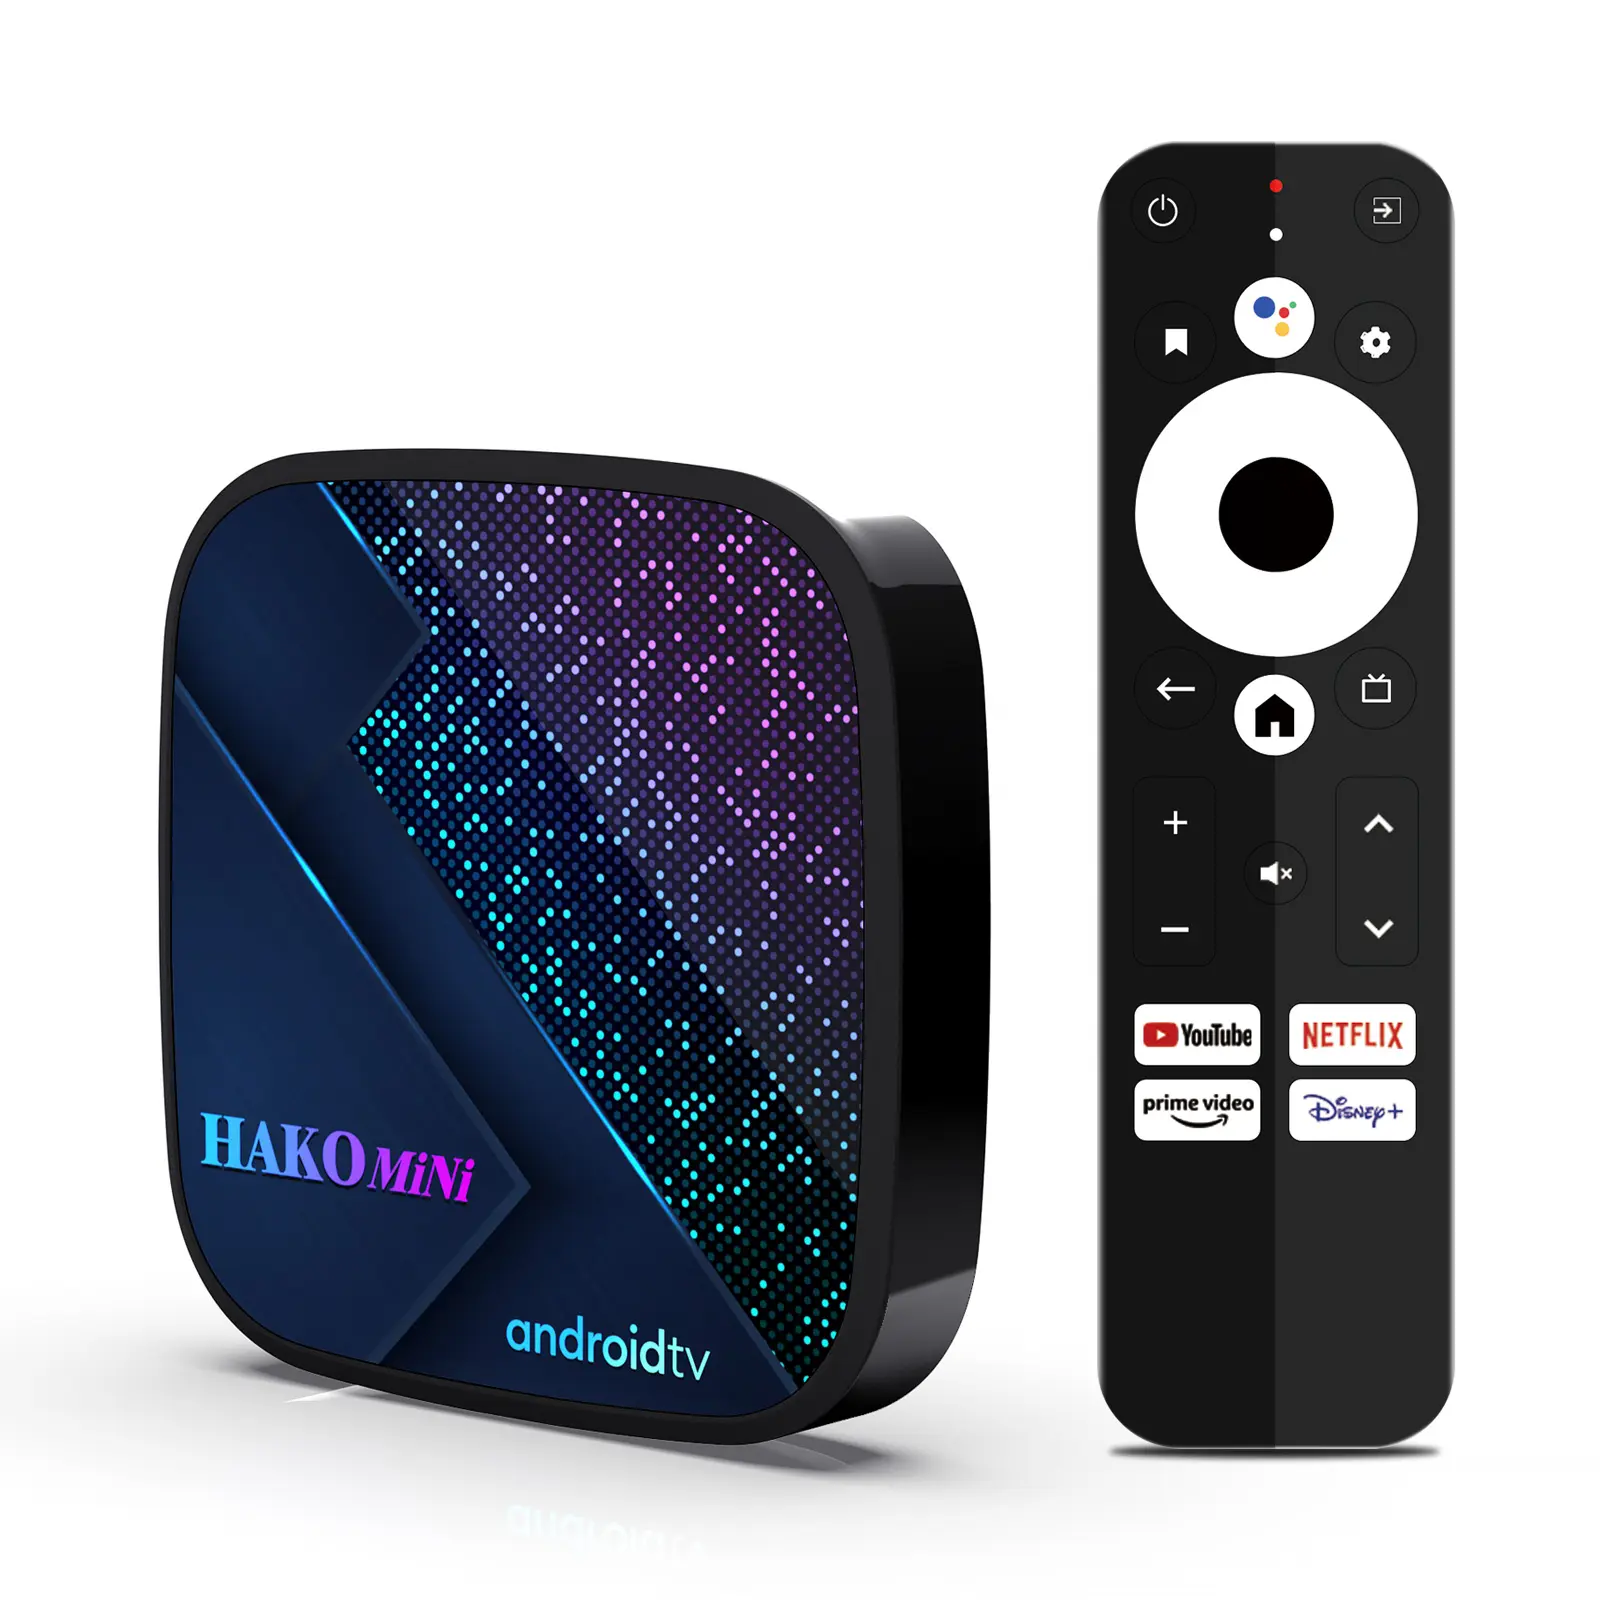 2022 new Hako mini S905Y4 2G8G 4G32G google certified android tv box netflix 4K certified support ATV android box